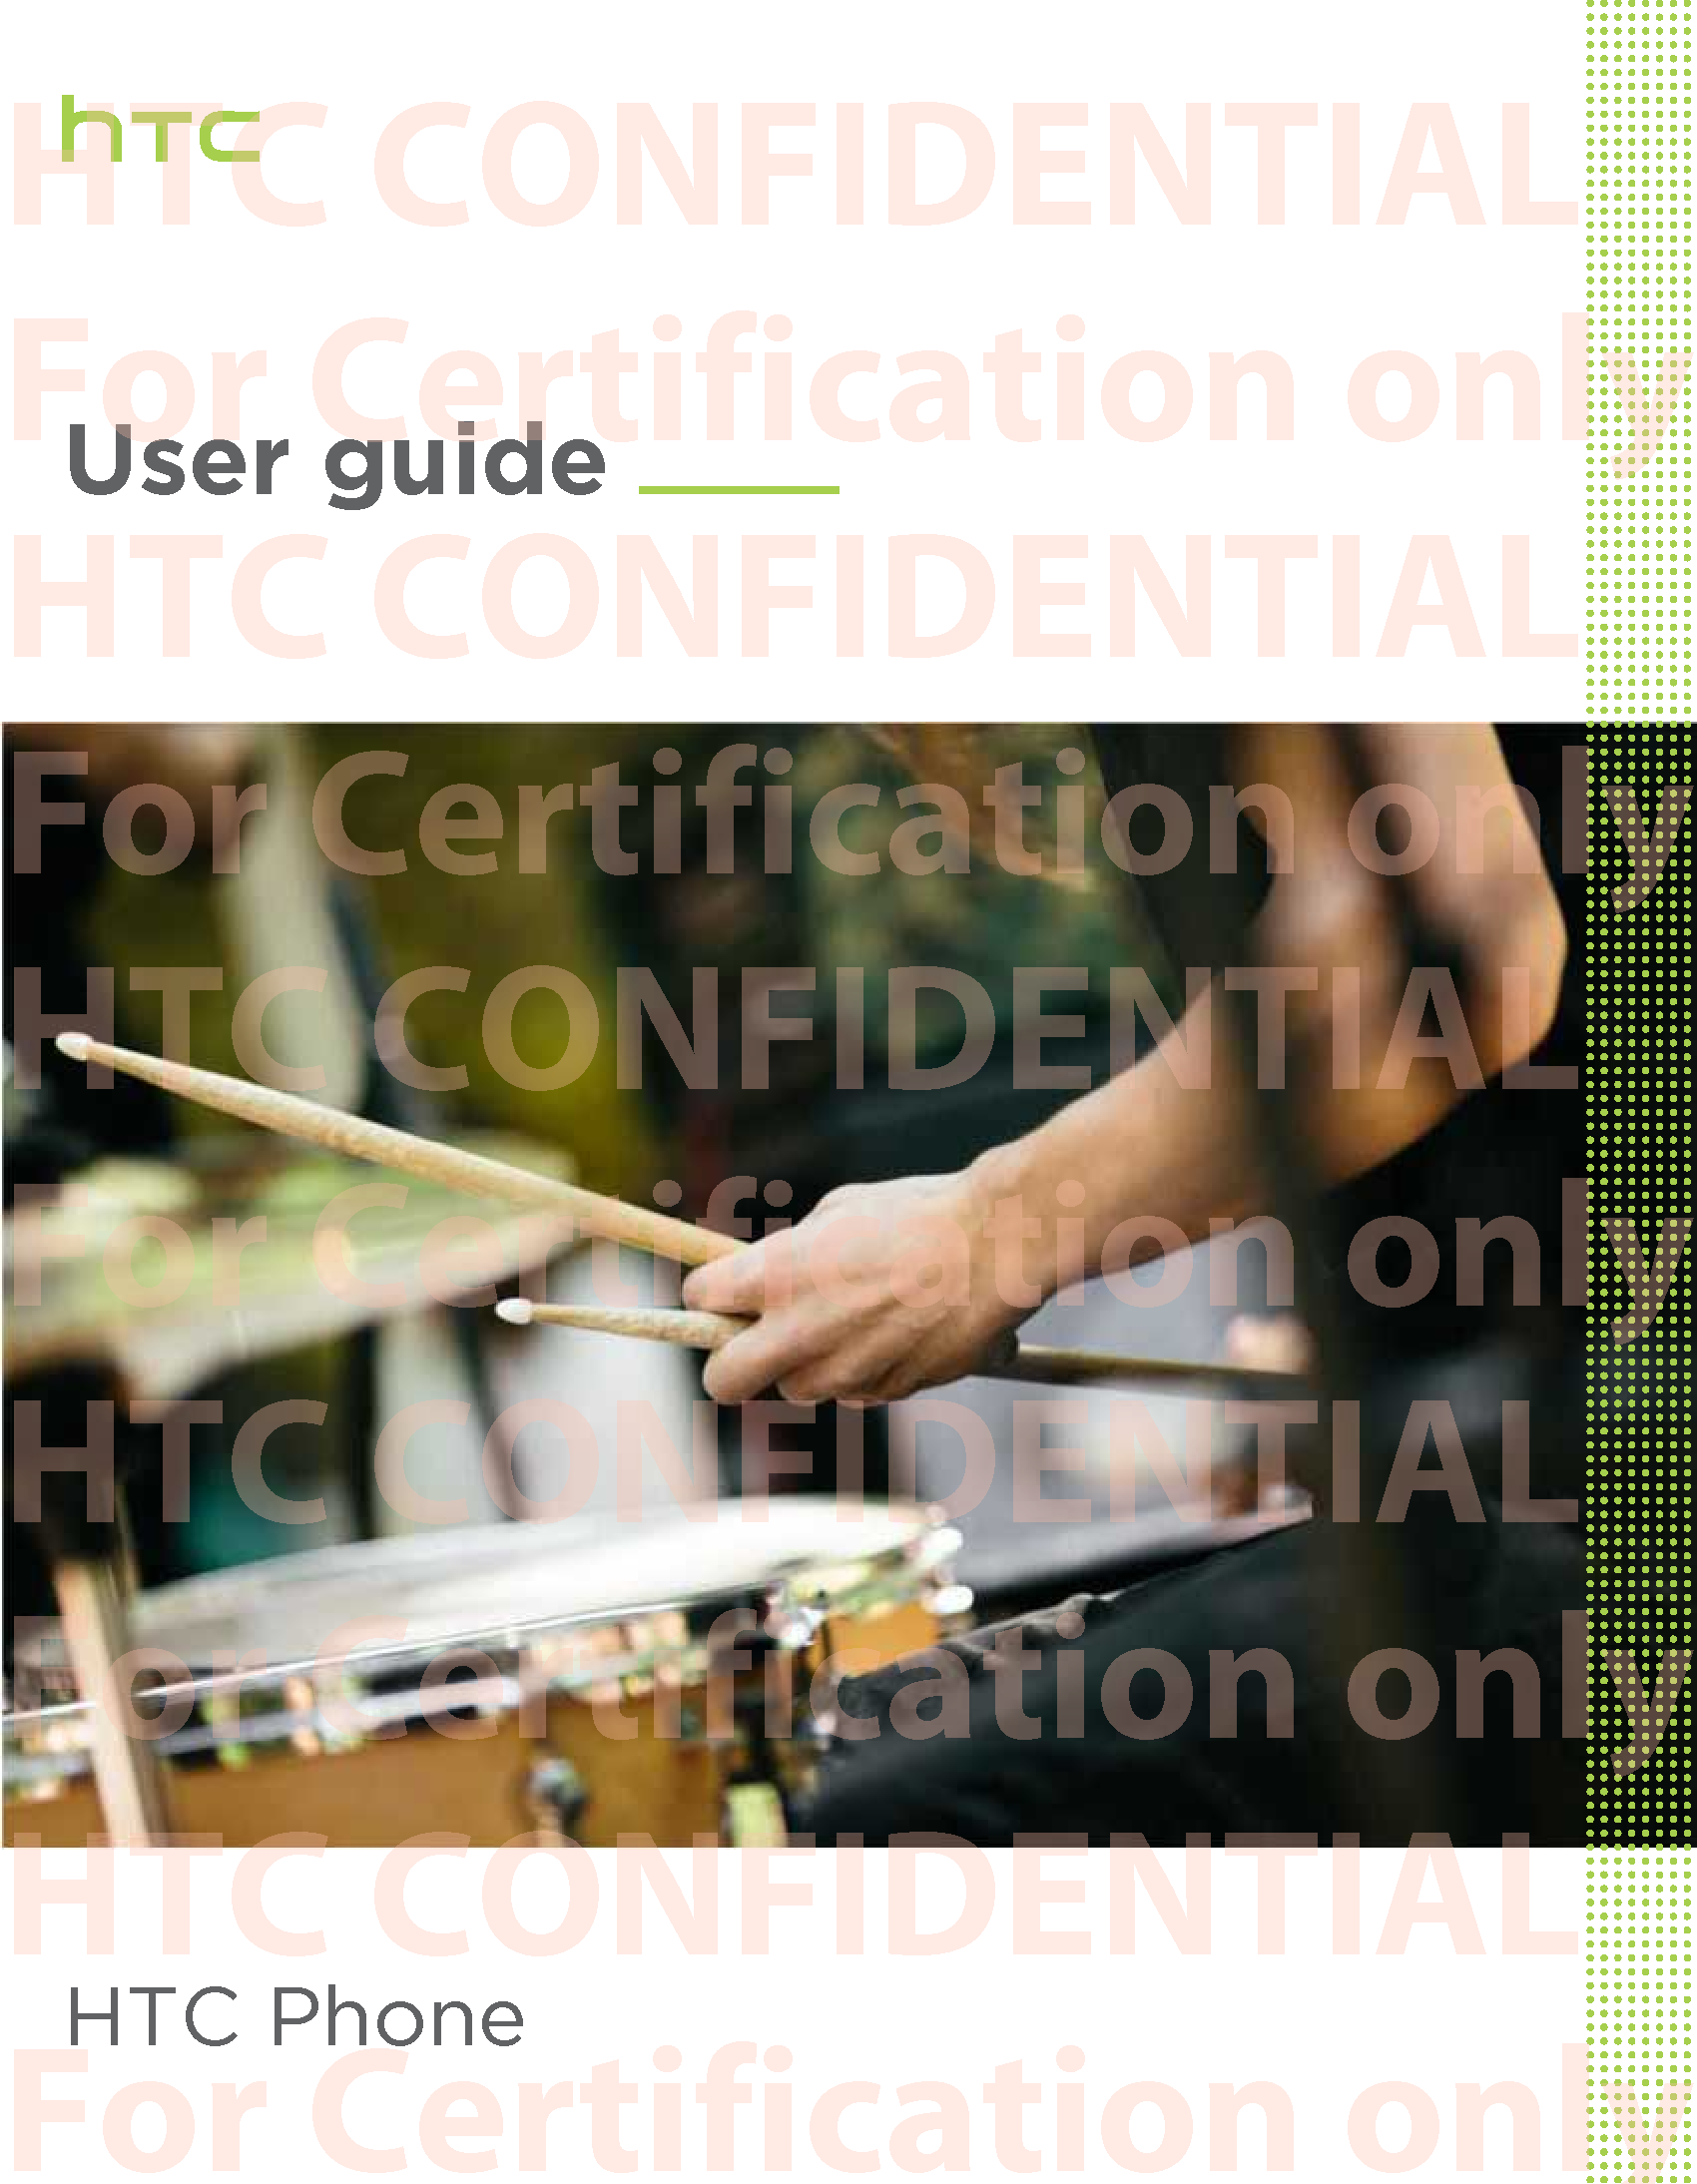 User guide HTC PhoneHTC CONFIDENTIAL For Certification only HTC CONFIDENTIAL For Certification only HTC CONFIDENTIAL For Certification only HTC CONFIDENTIAL For Certification only HTC CONFIDENTIAL For Certification only